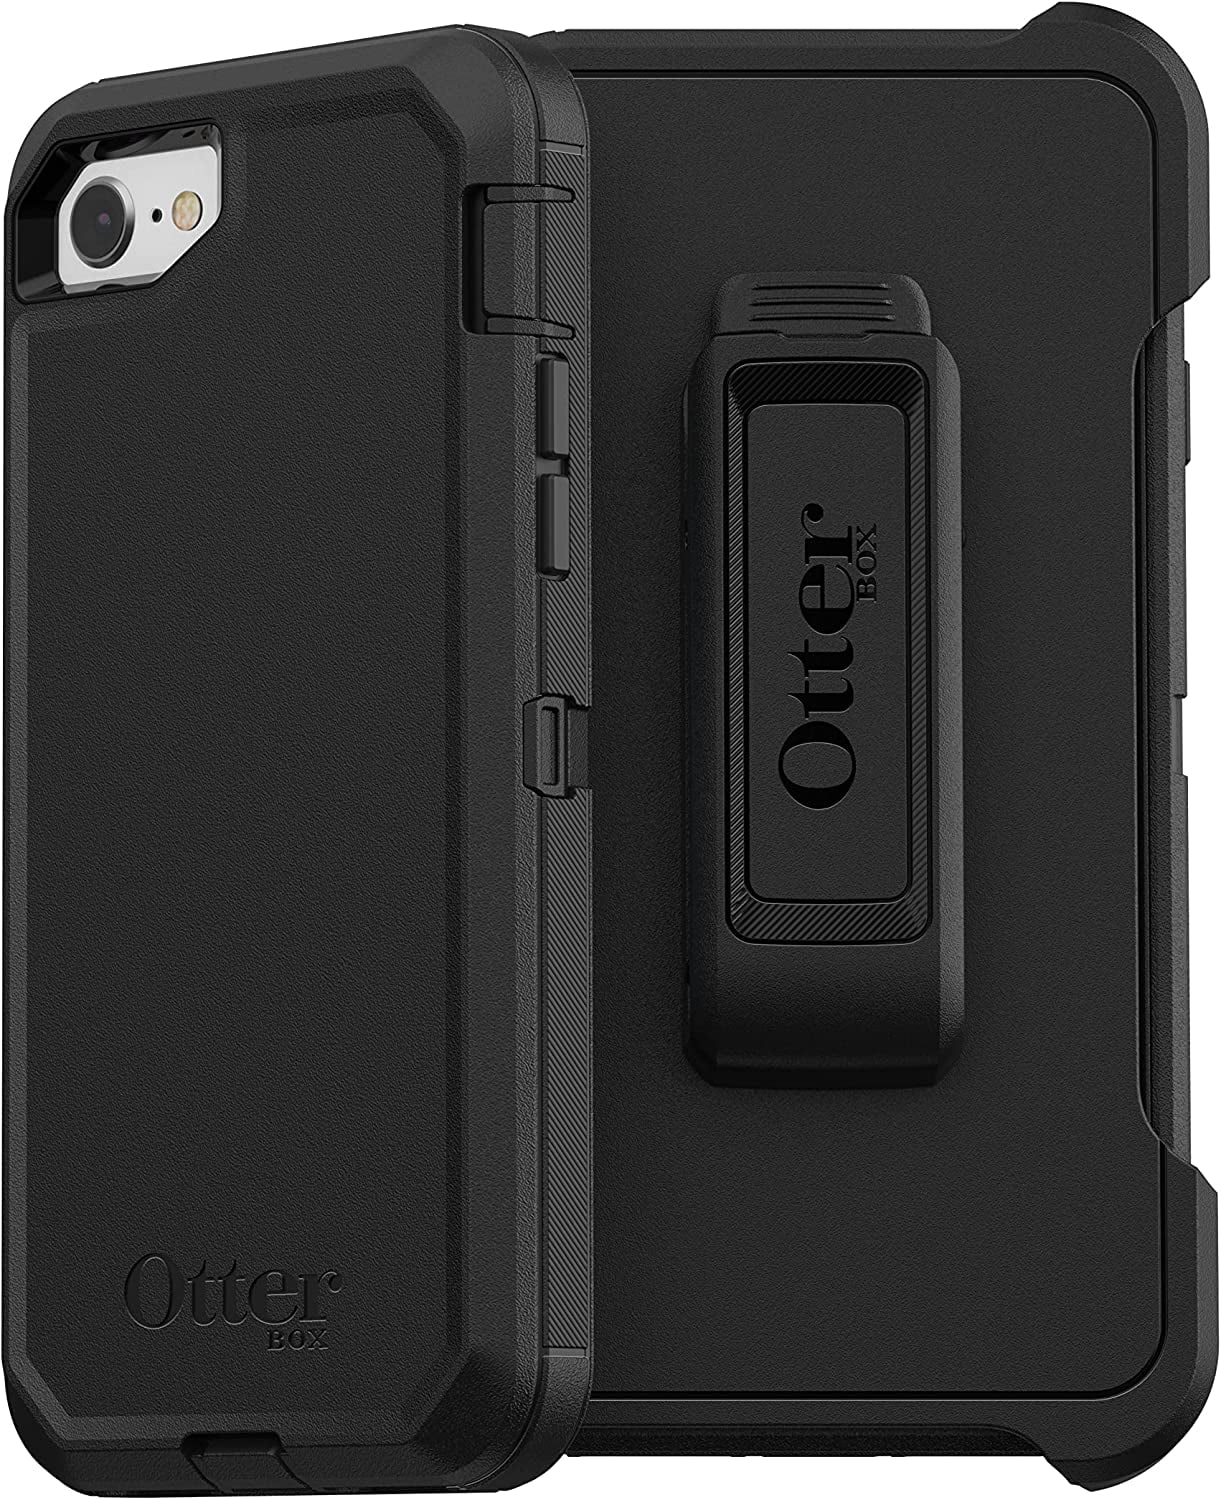 Otter Box Defender Rugged Protection Case For iPhone SE, 8, 7 - Dutch Goat